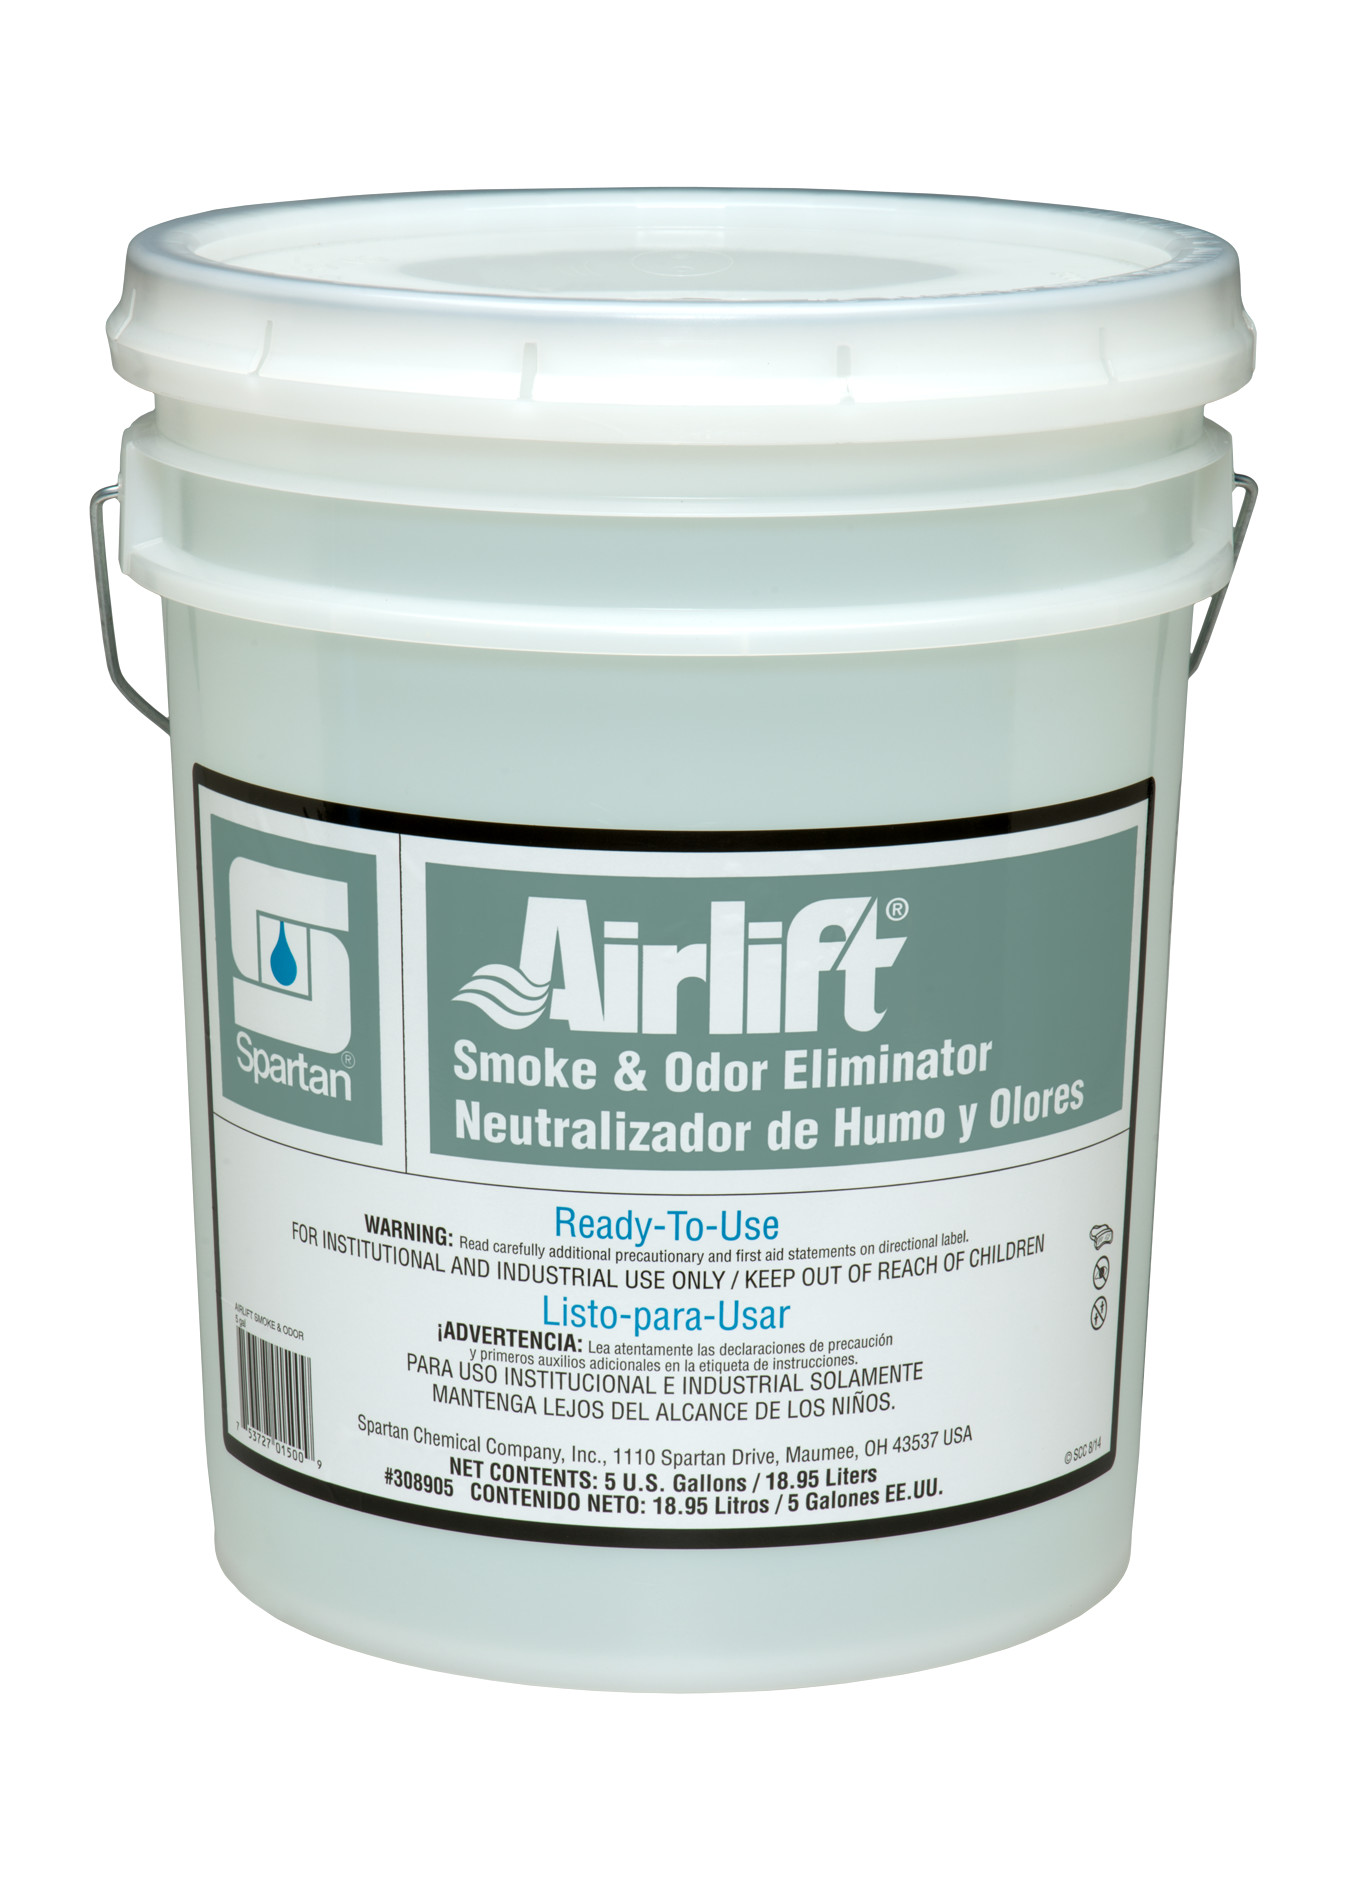 Spartan Chemical Company Airlift Smoke & Odor Eliminator, 5 GAL PAIL